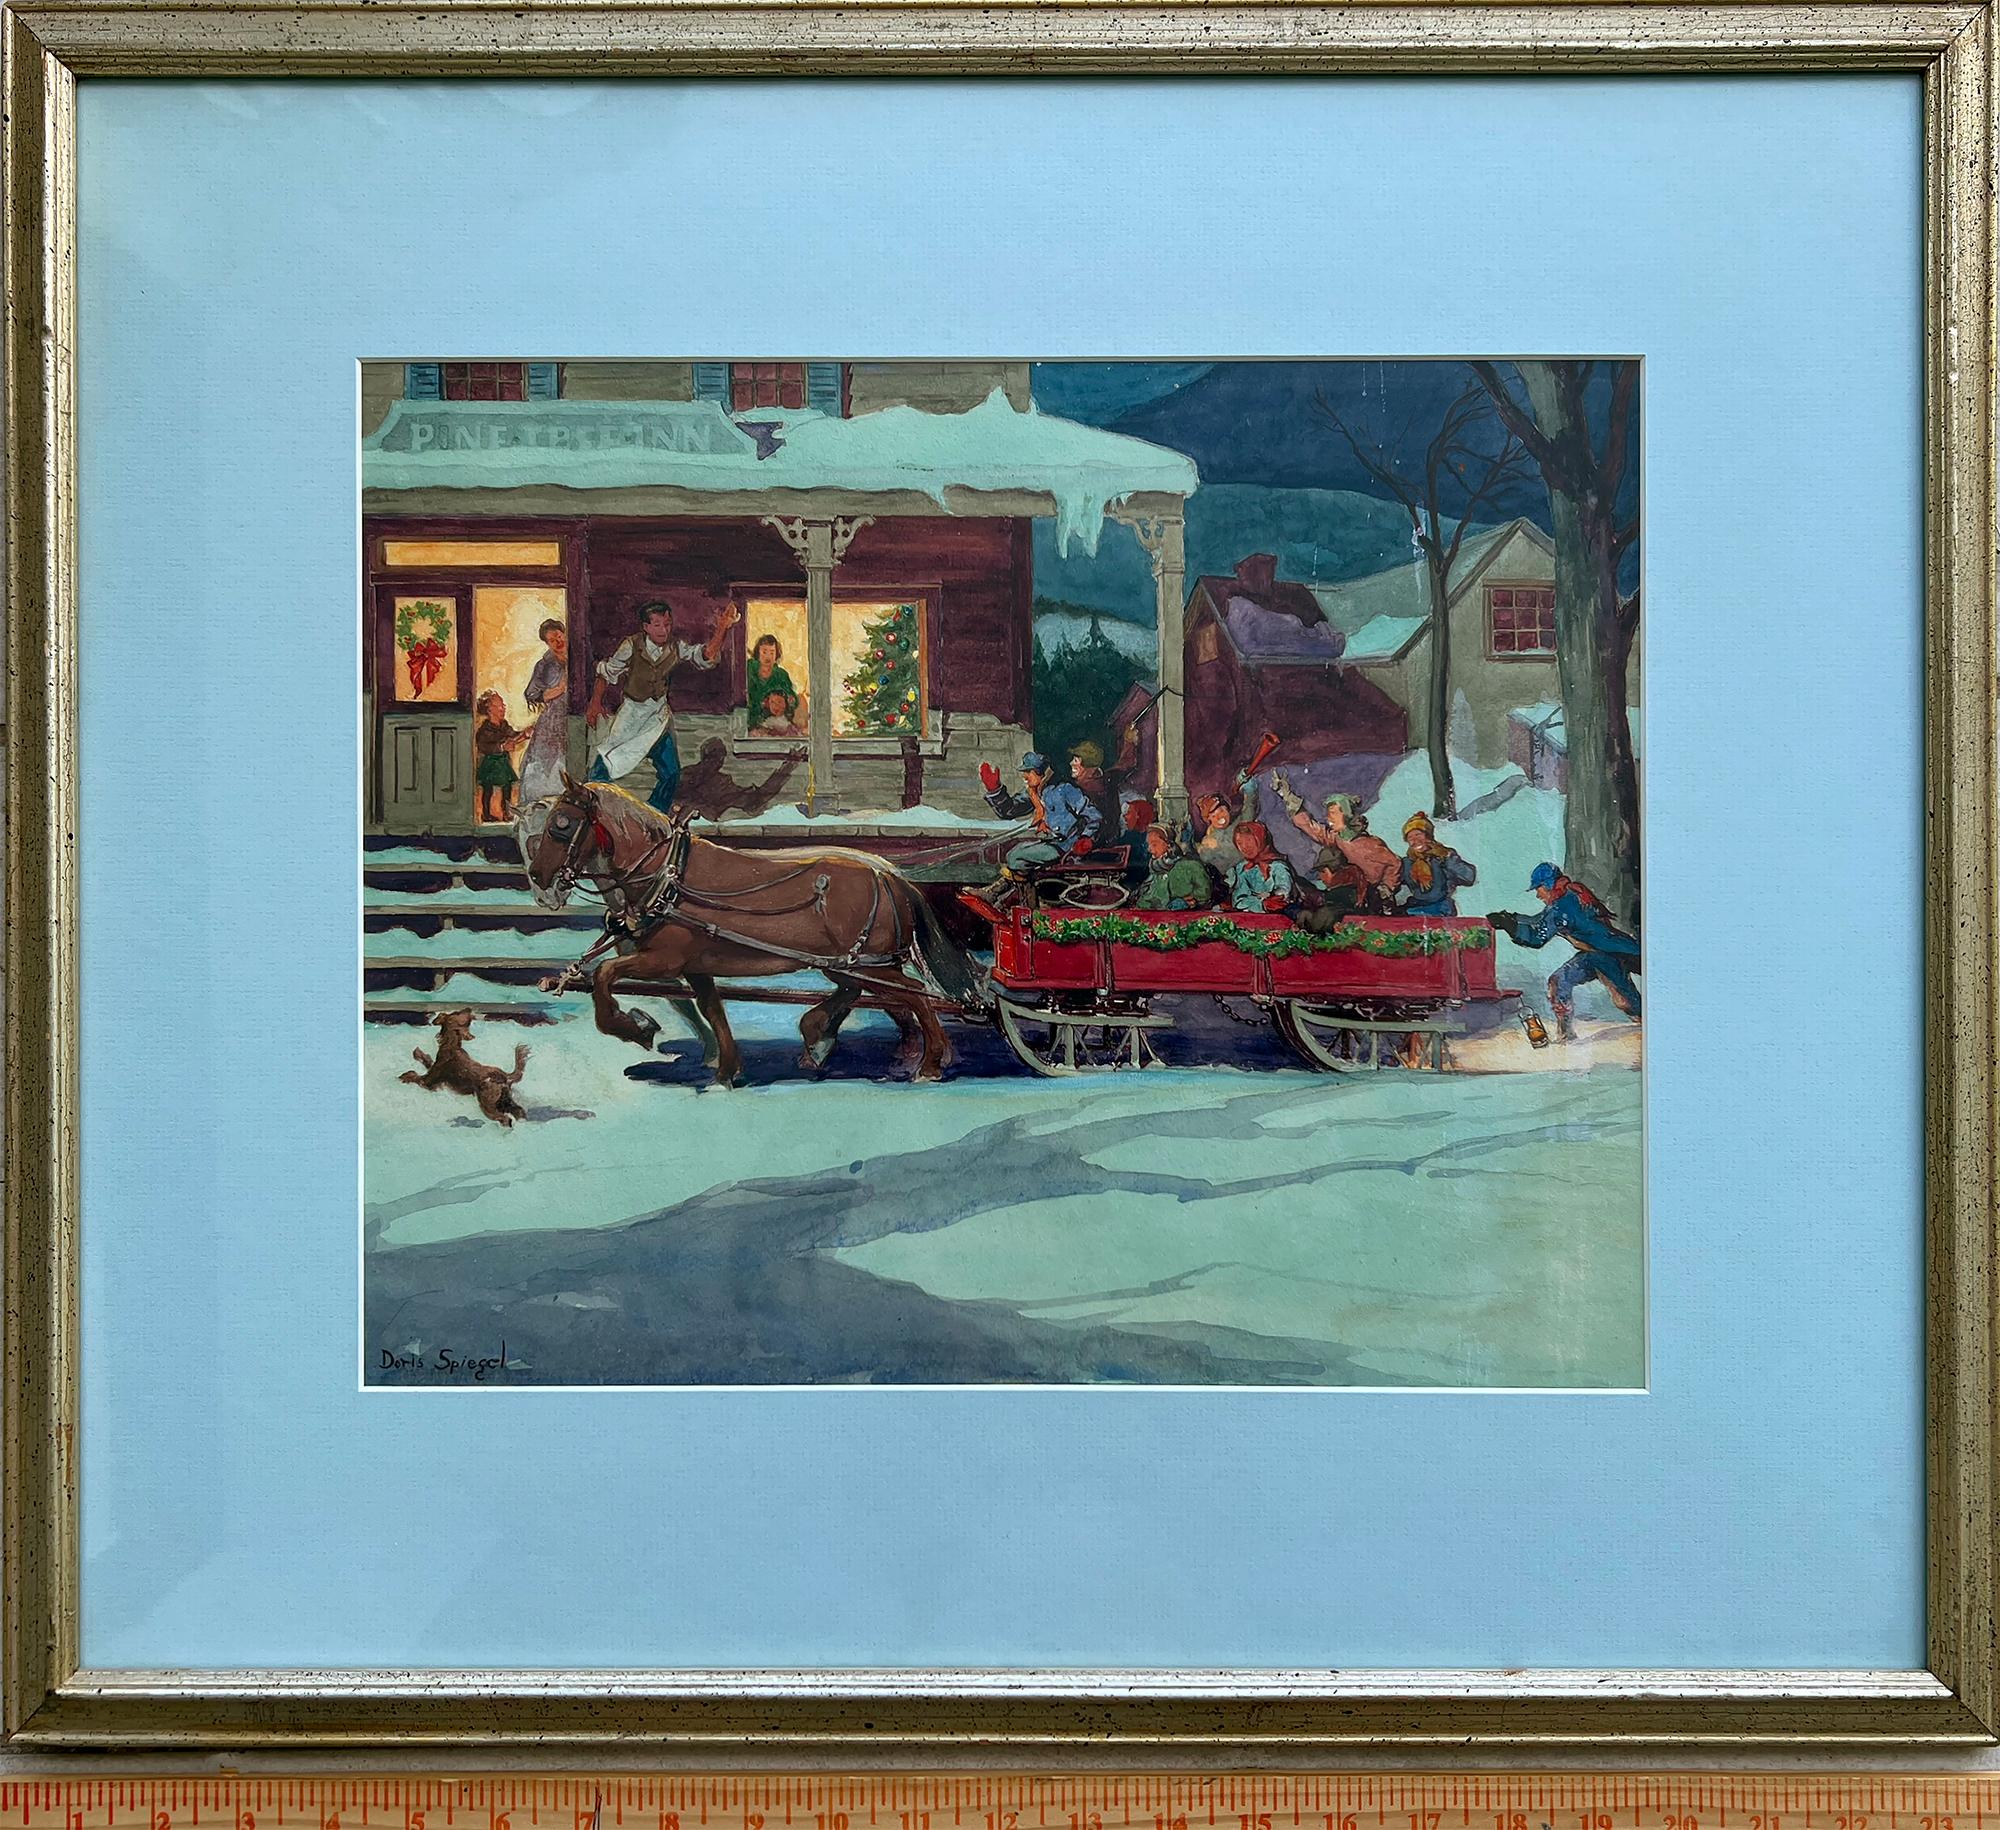 Americana,  Horse Drawn Sled Christmas Celebration with Barking Dog - American Impressionist Painting by Doris Spiegel